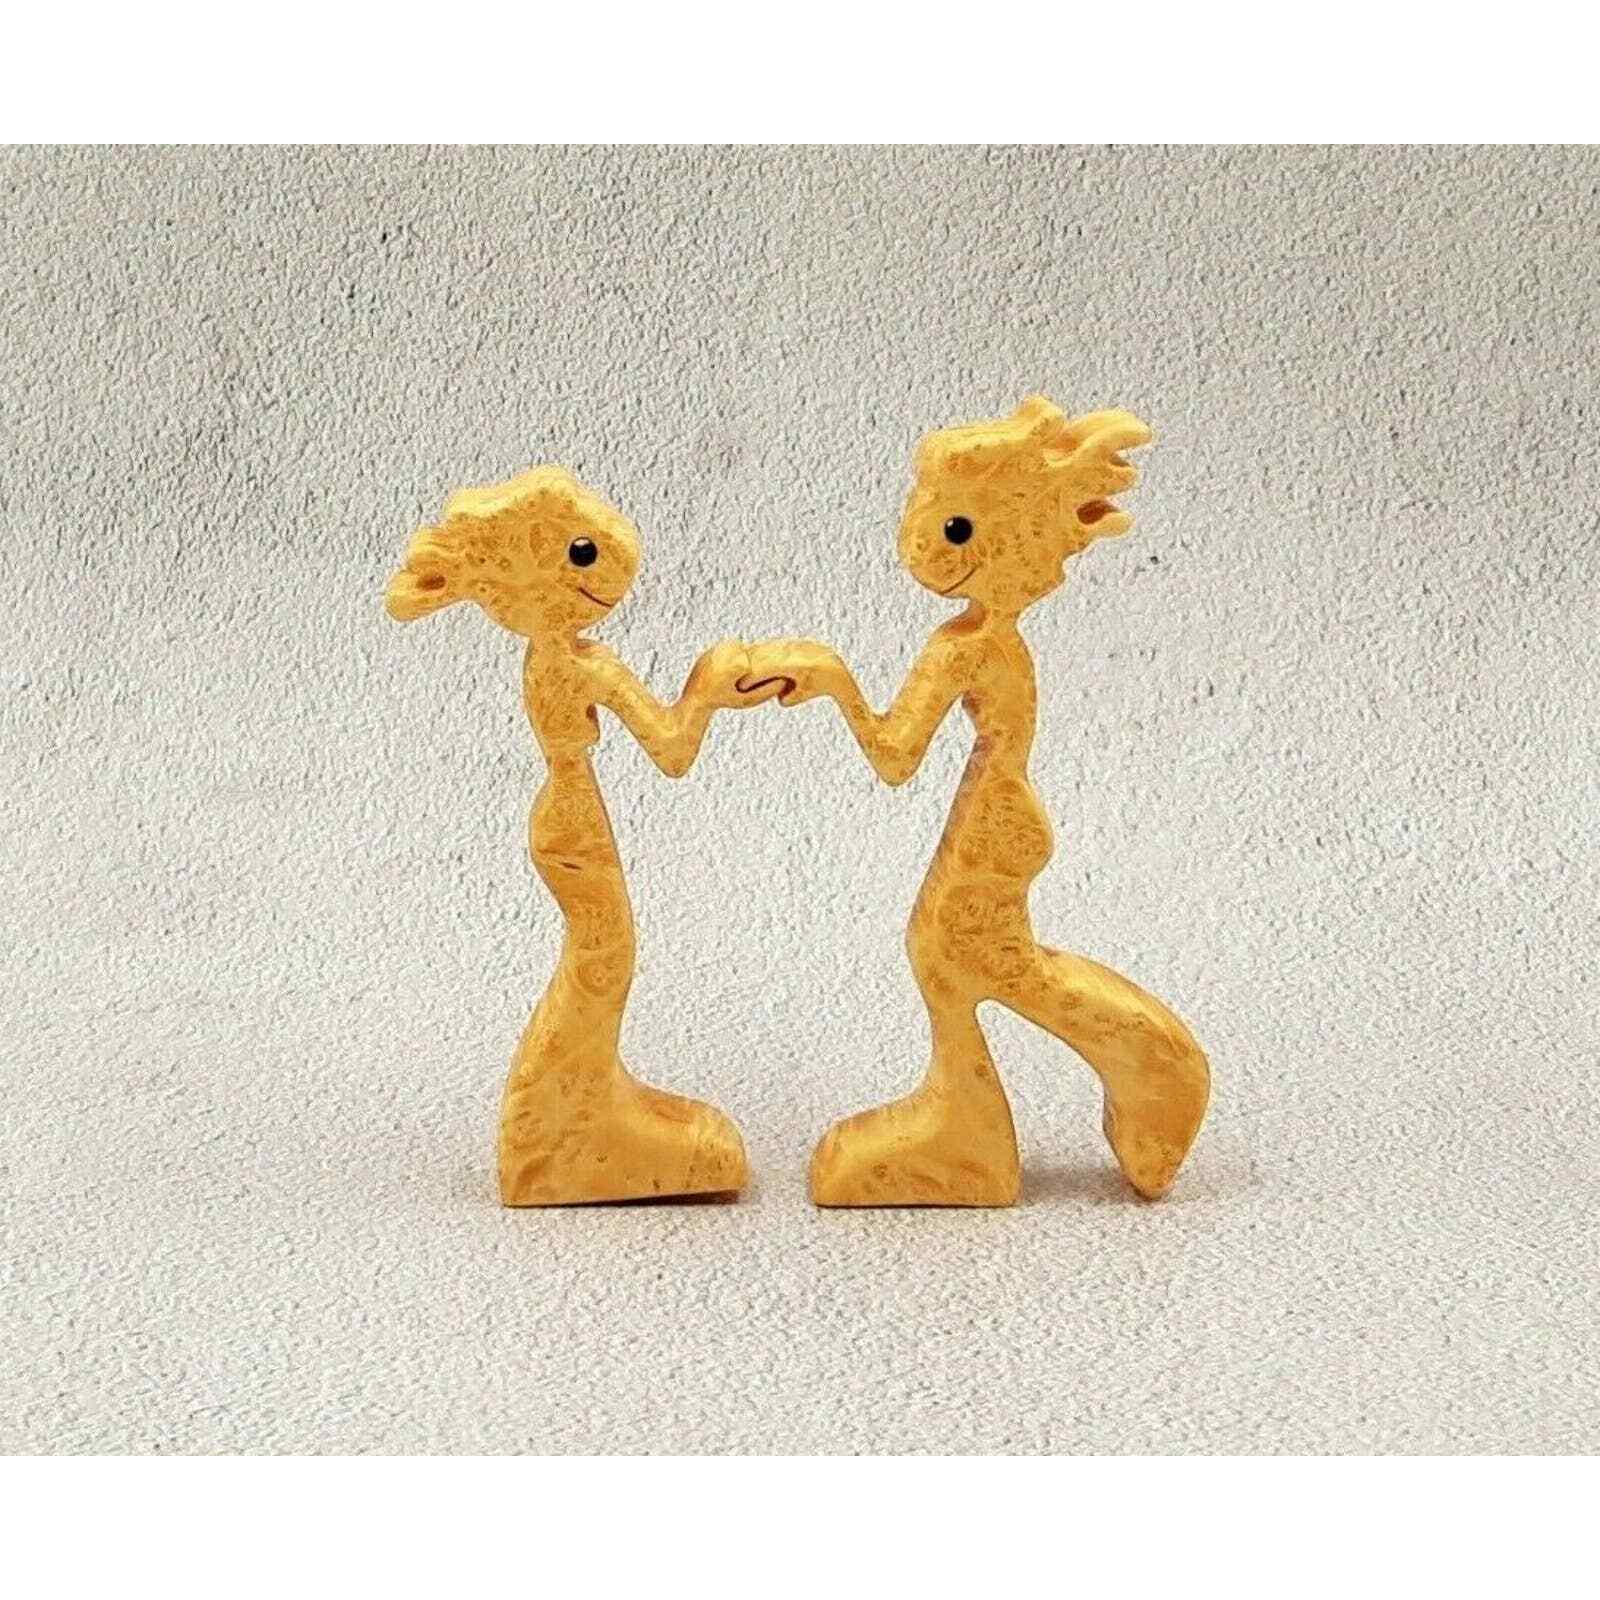 Hand carved wooden couple figurine Pair mini maple burl wood